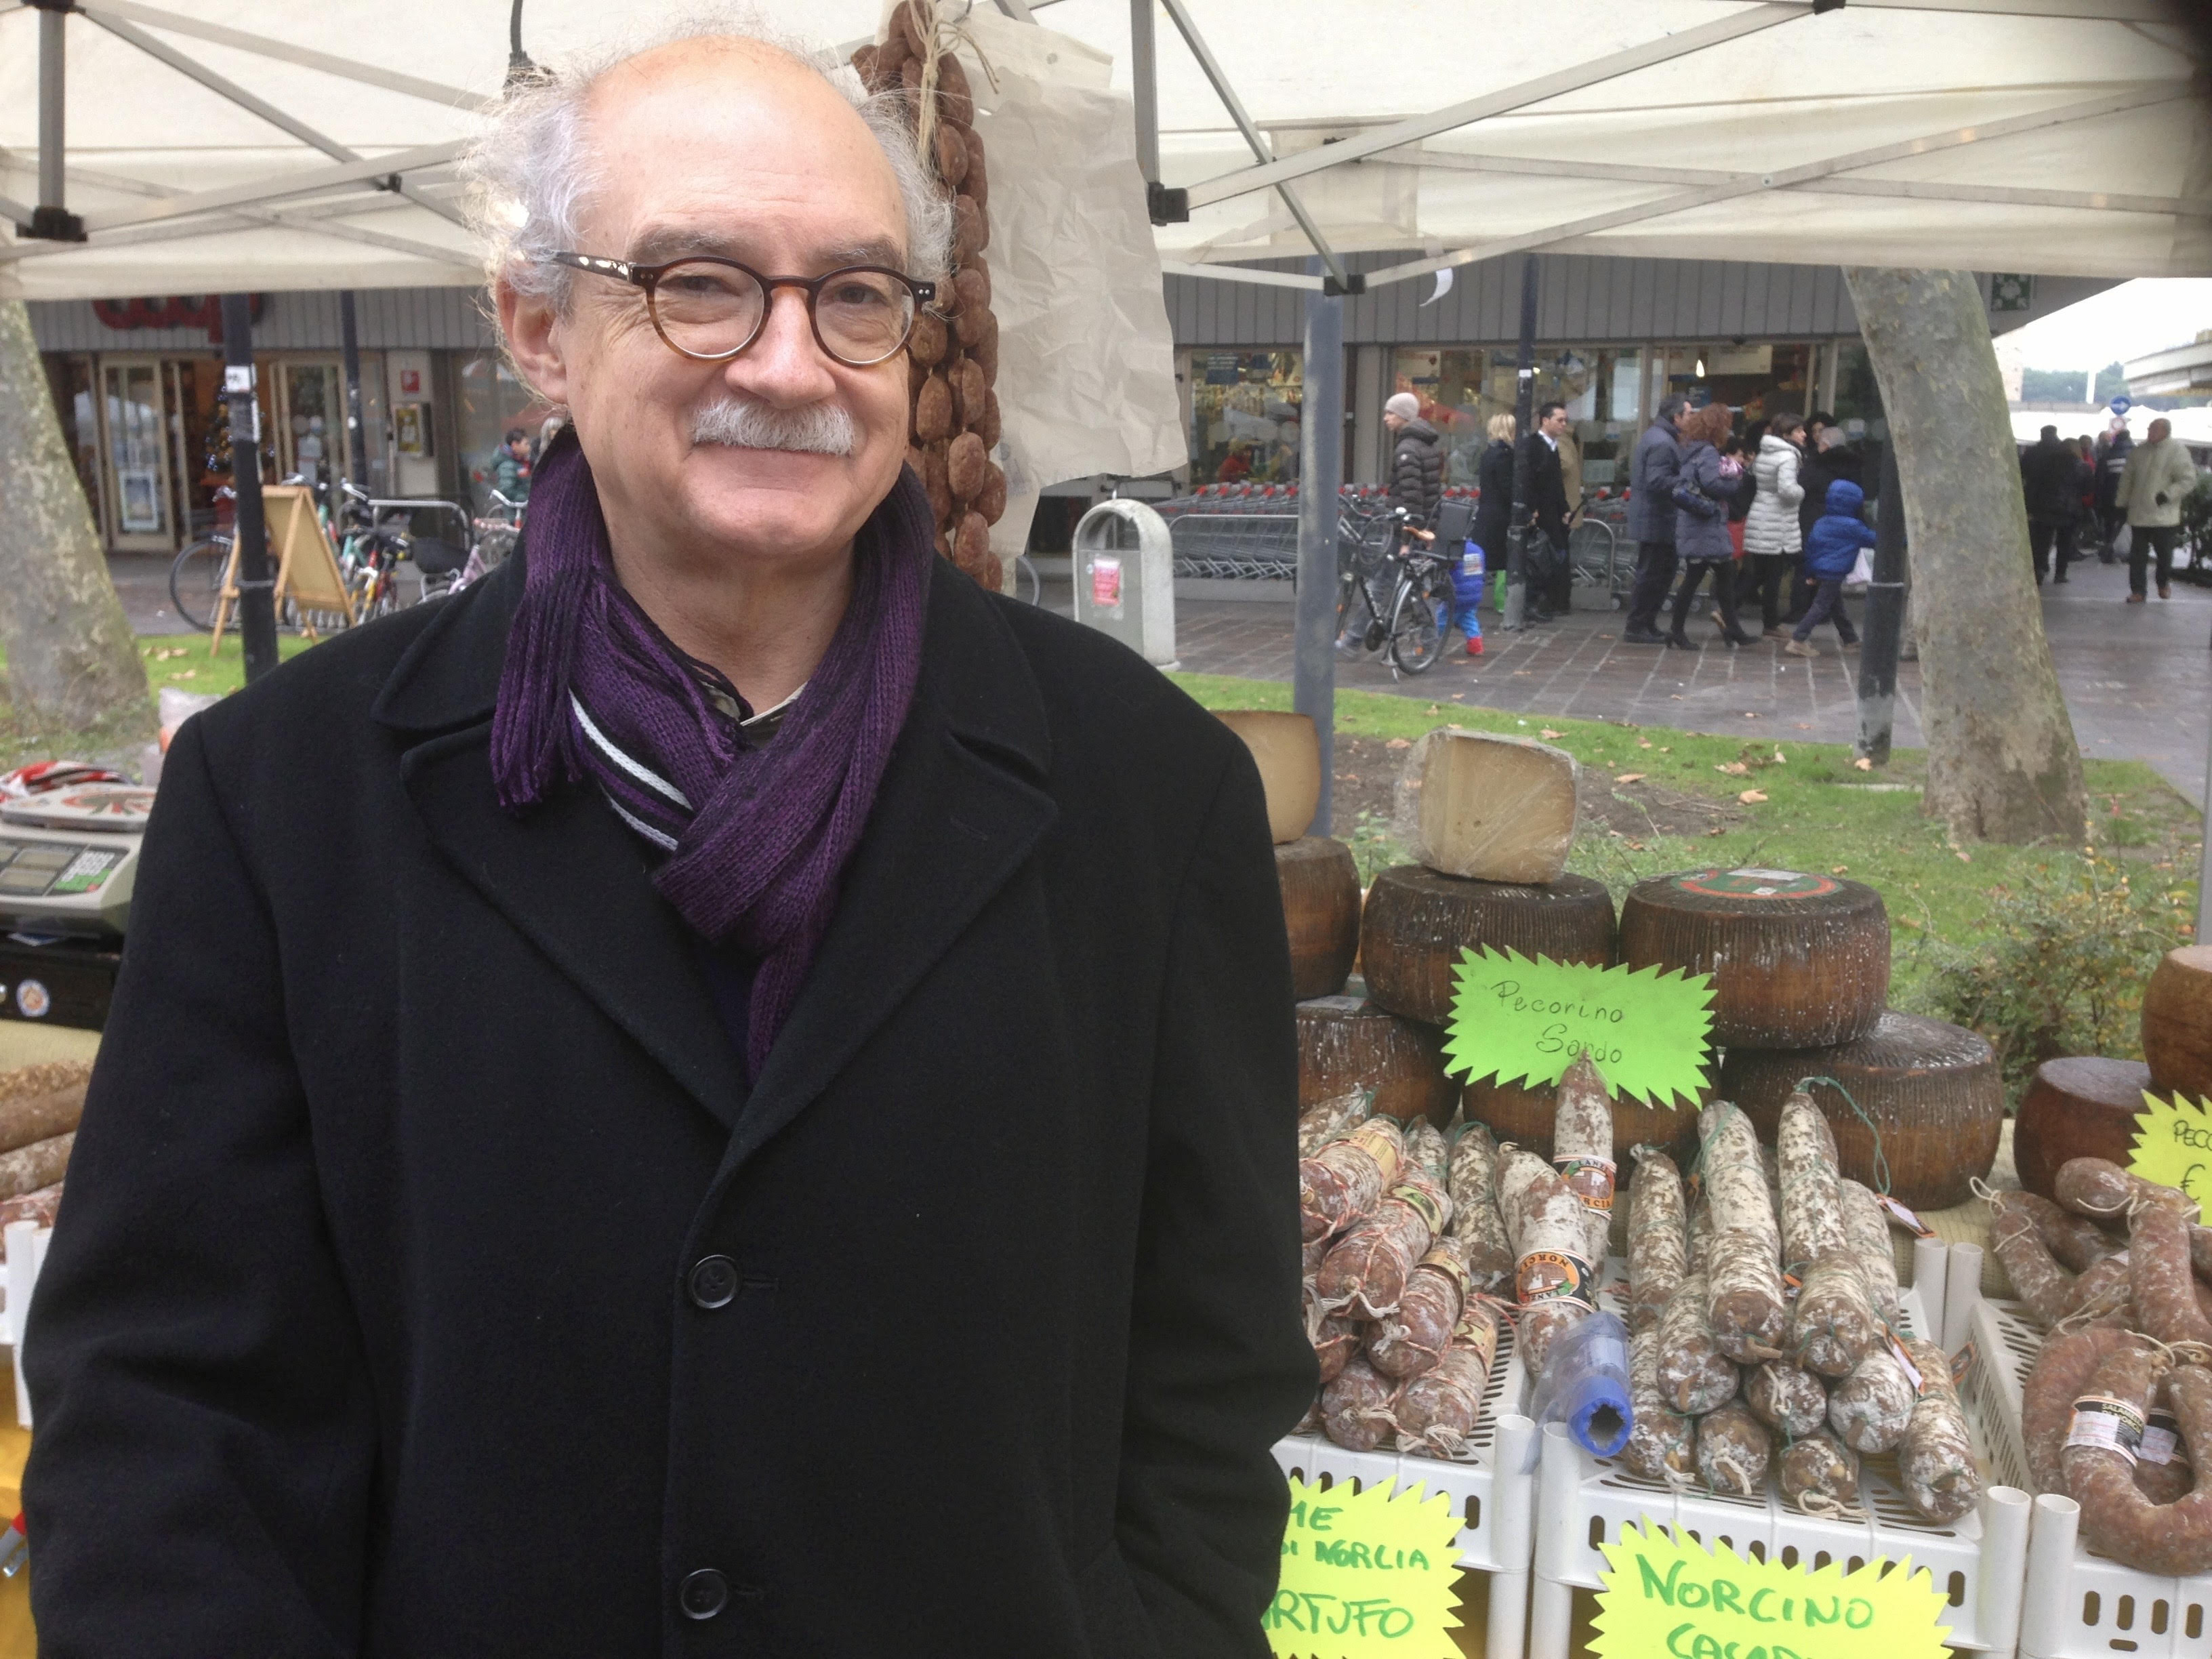 A white man with gray hair, glasses, and a mustache stands in front of a row of cured meats and cheeses at an outdoor market. He wears a black wool coat with a purple scarf.